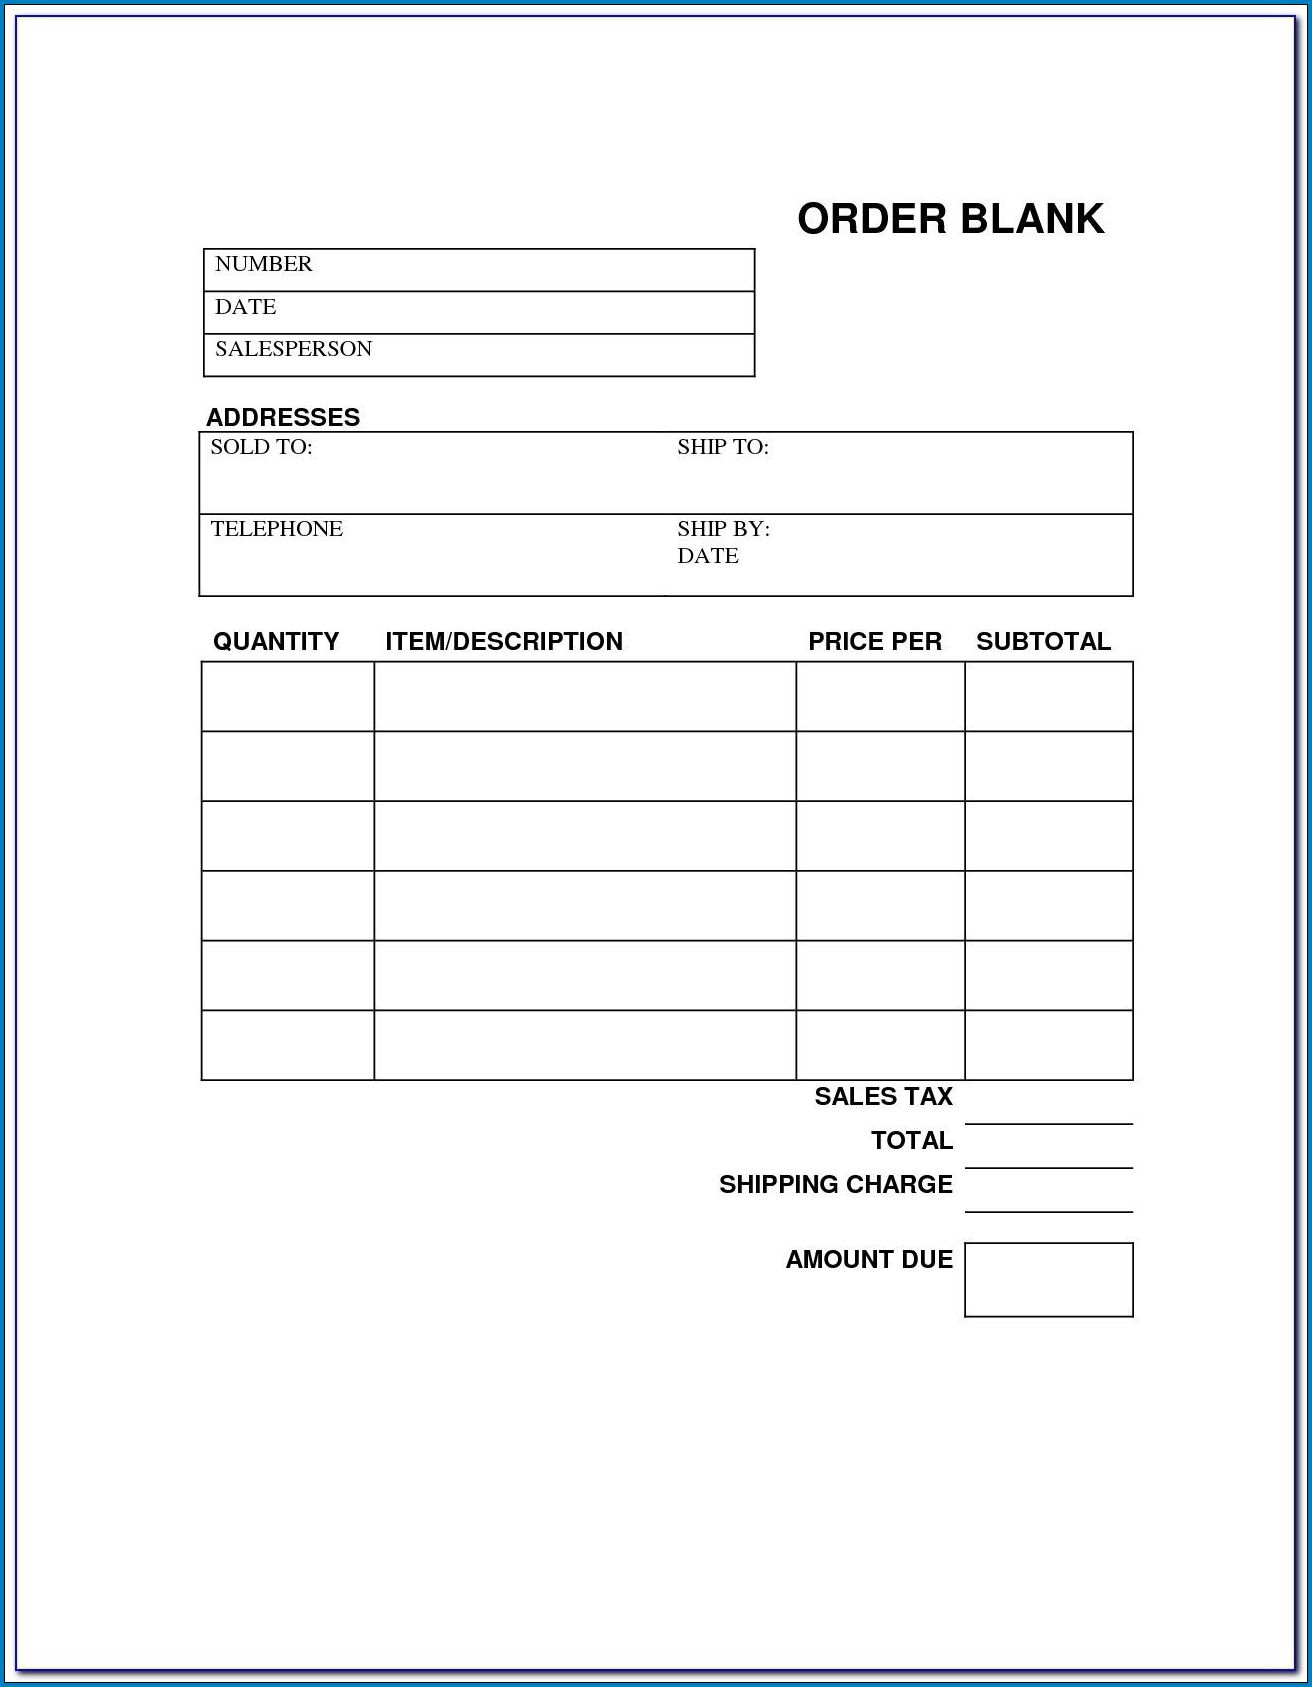 Example of Free Work Order Template